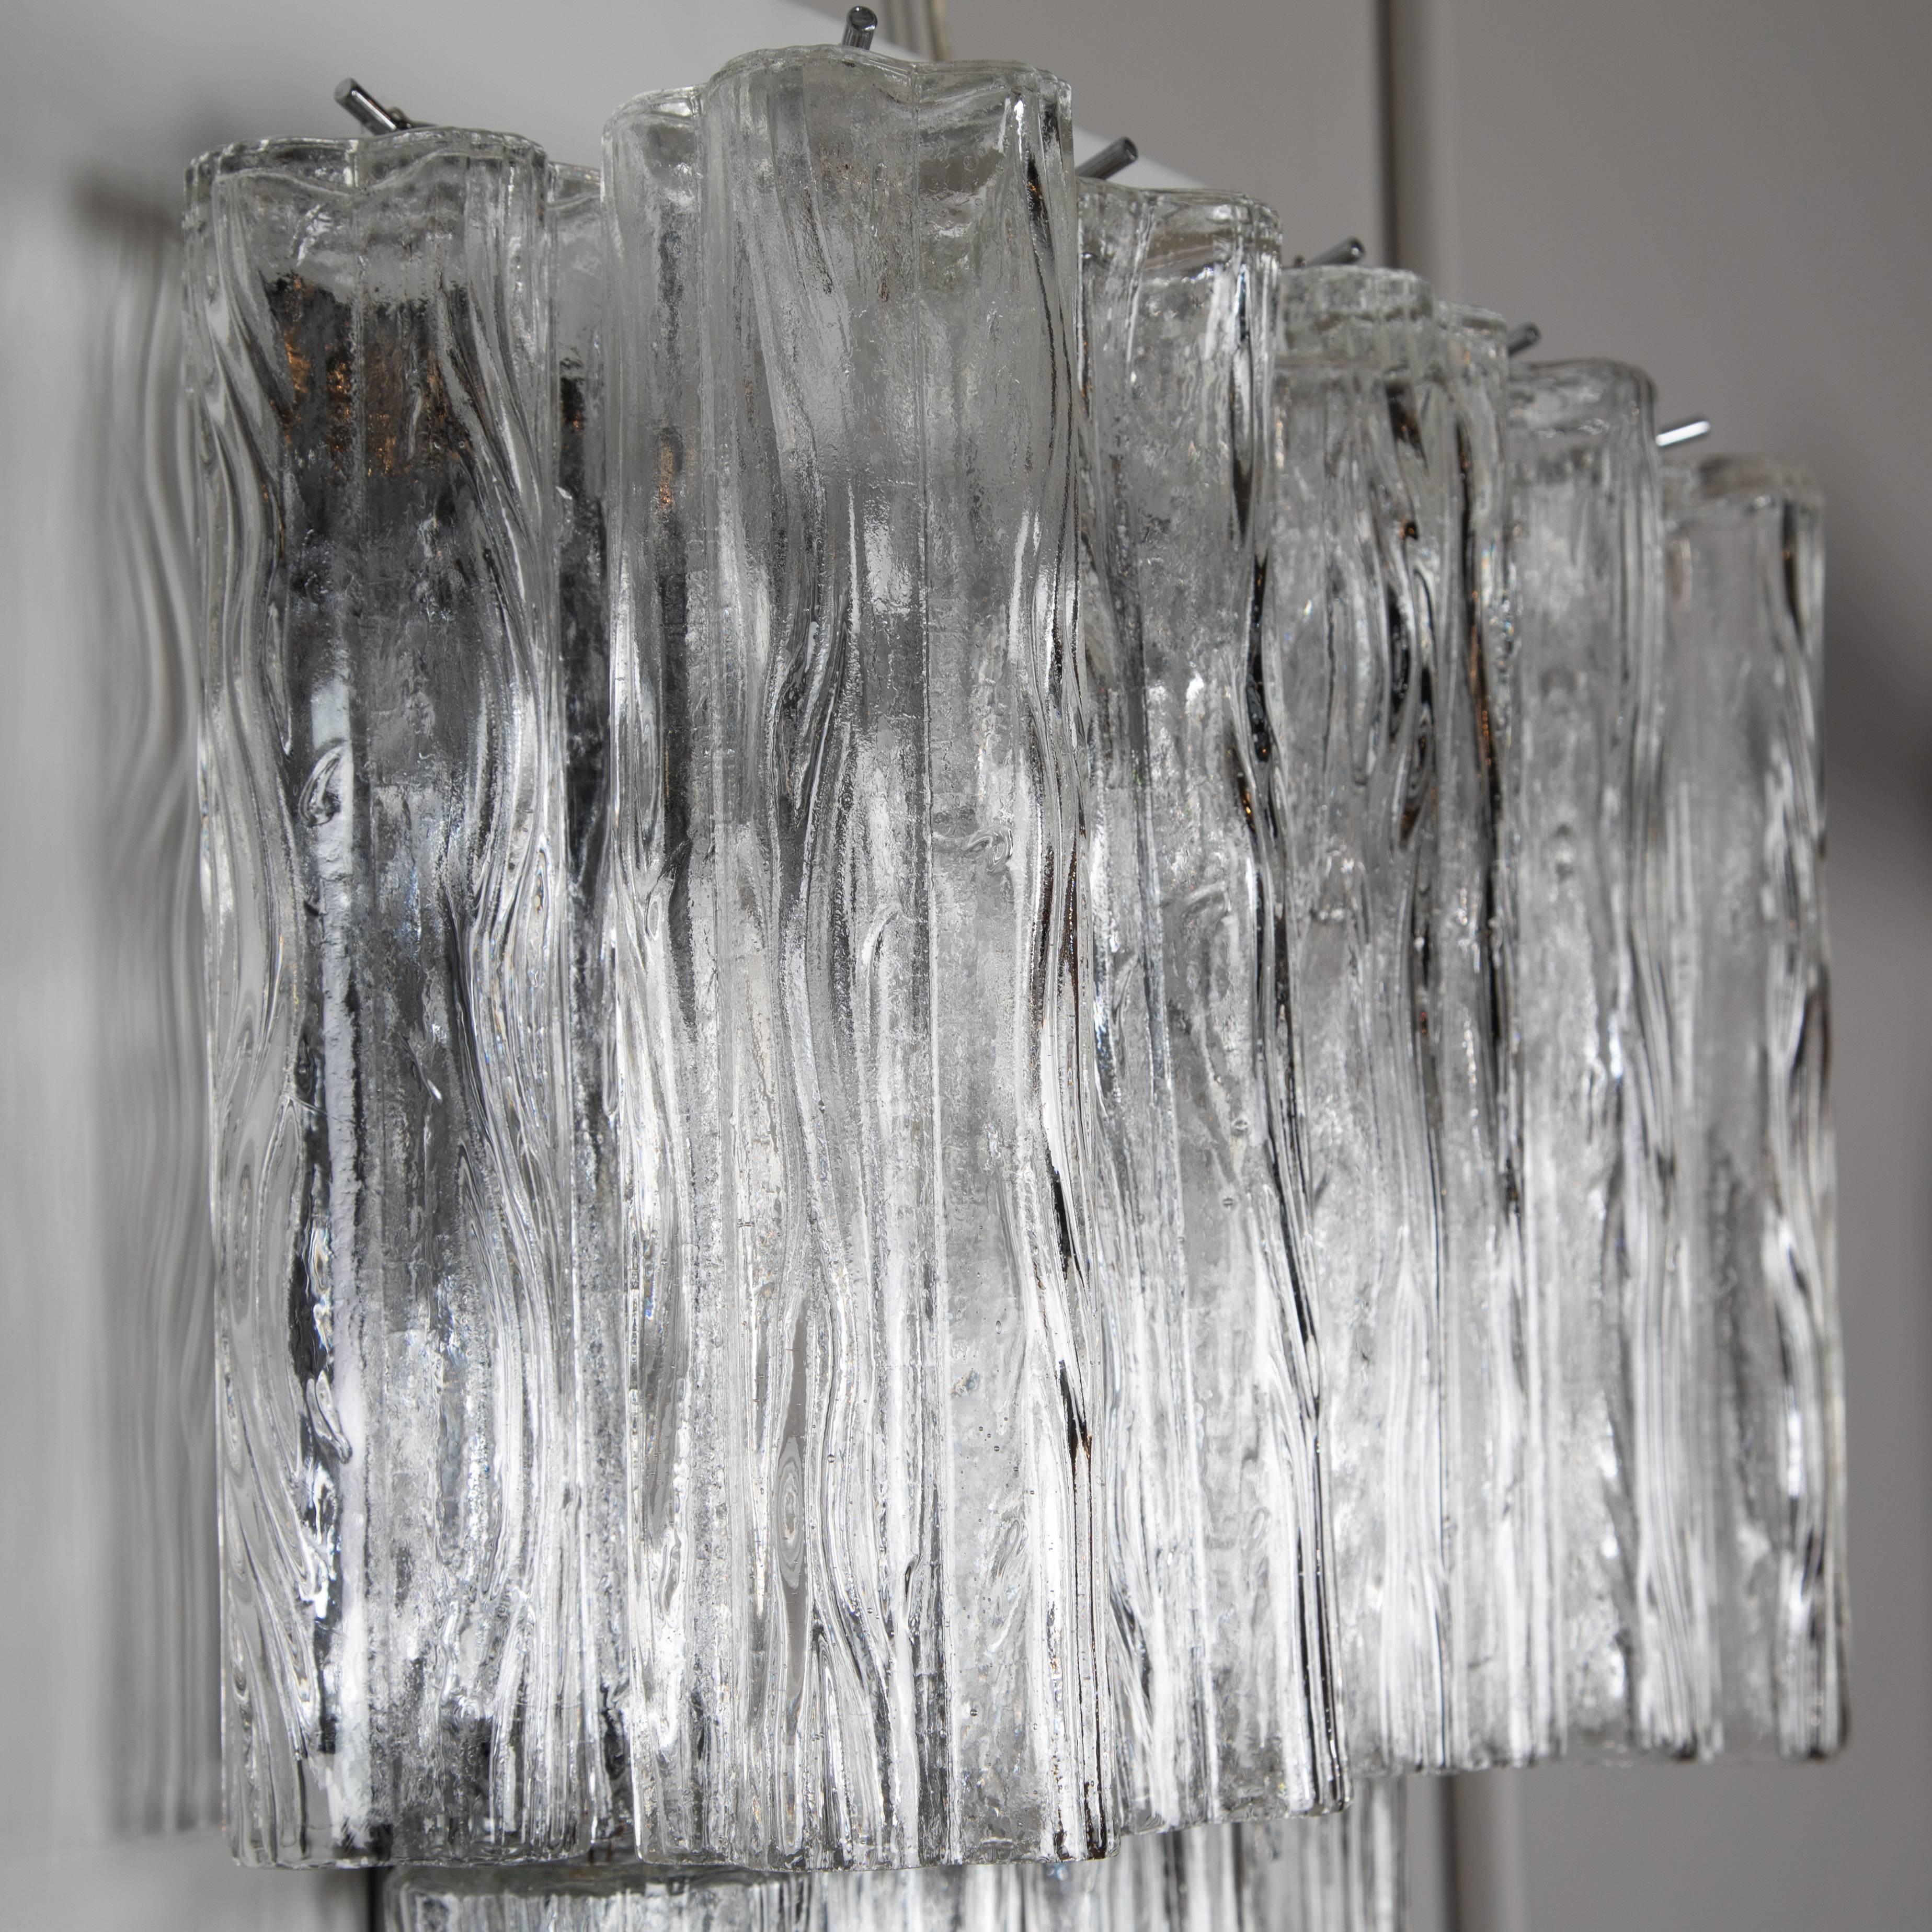 Two Pairs of Large Murano Sconces with Tronchi Crystals, circa 1970s For Sale 2